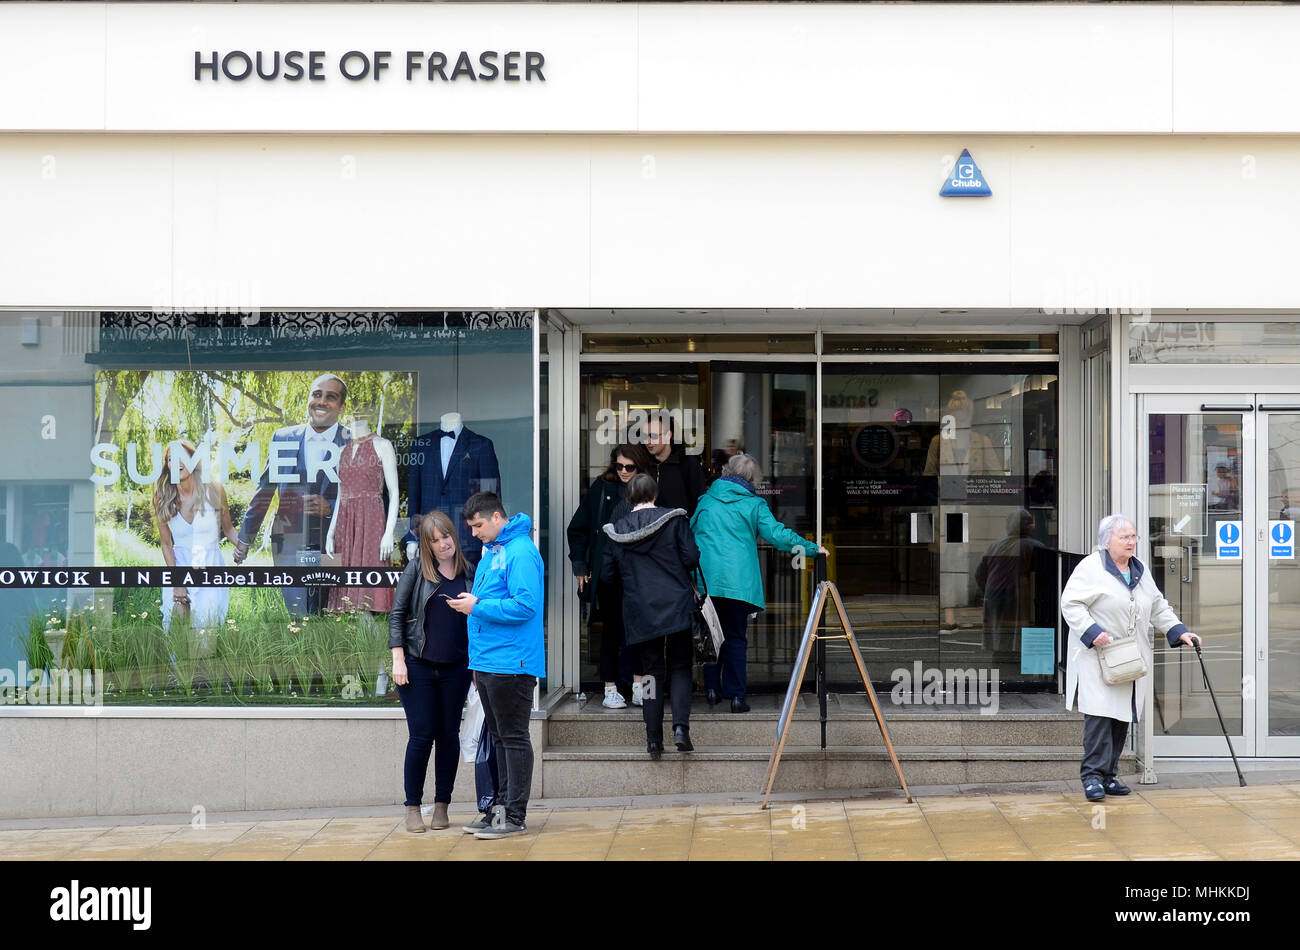 House of Fraser, Leamington Spa, UK, one of 31 stores due for closure. House of Fraser announces store closures, a Company Voluntary Arrangement,  and a new majority owner in latest restructuring plan. Hundreds of jobs are at stake throughout the chain's 59 stores. CBanner, a Chinese retail business which owns Hamleys, will take a new 51% stake, with former Chinese majority shareholders Nanjing Cenbest retaining a minority share. Credit: Antony Nettle/Alamy Live News Credit: Antony Nettle/Alamy Live News Credit: Antony Nettle/Alamy Live News Credit: Antony Nettle/Alamy Live News Stock Photo